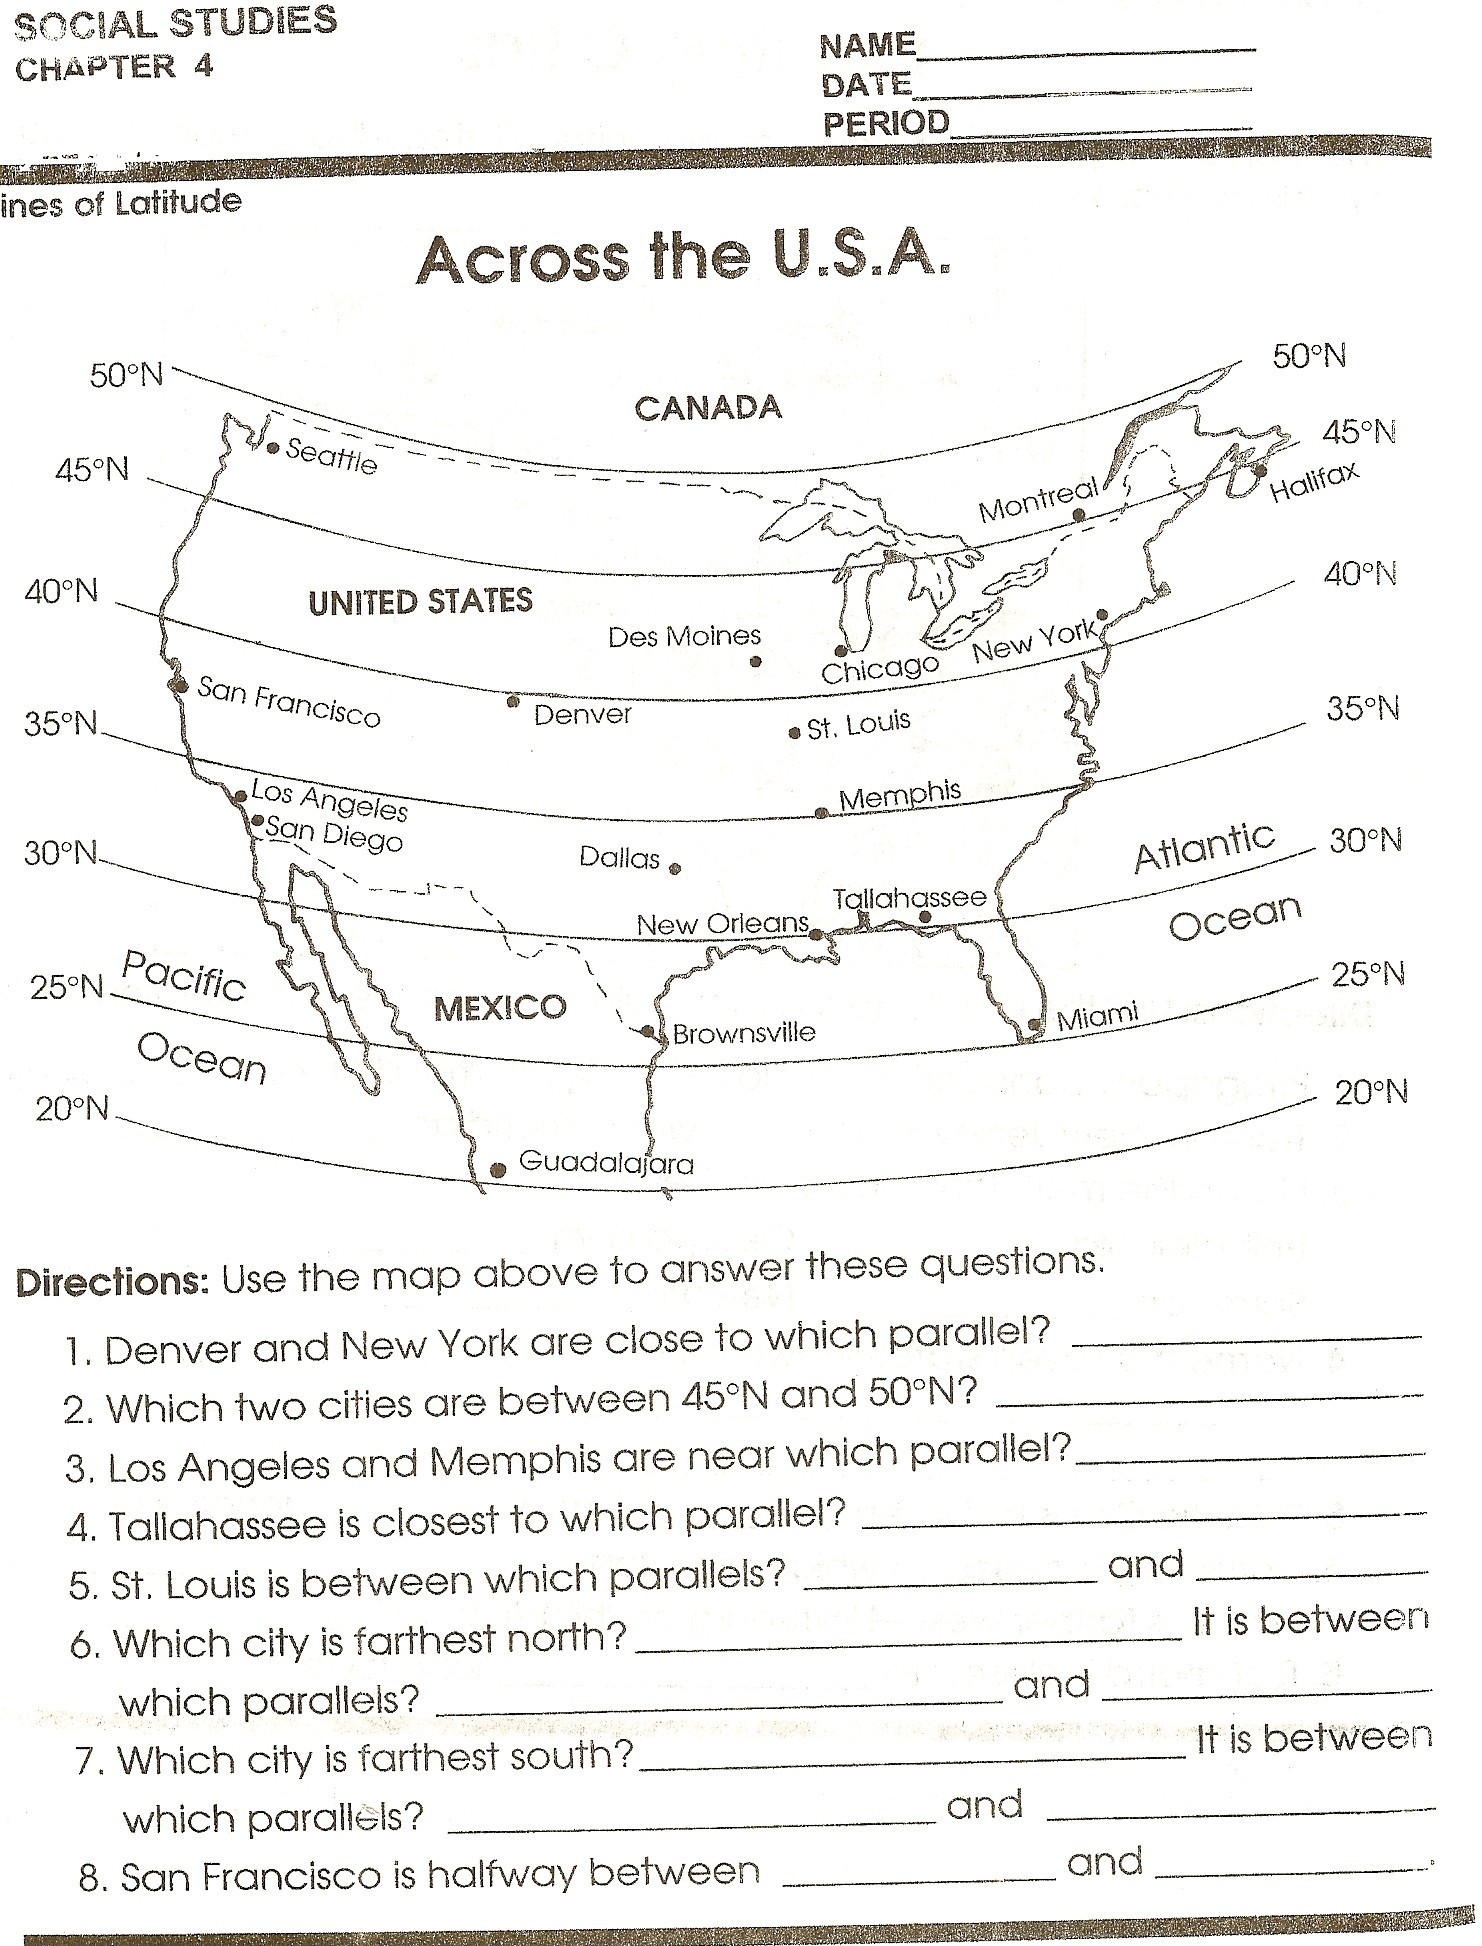 Printable Map Worksheets For 4th Grade New Map Worksheet 6th Grade New Blank Us Maps Worksheet For 4th Grade